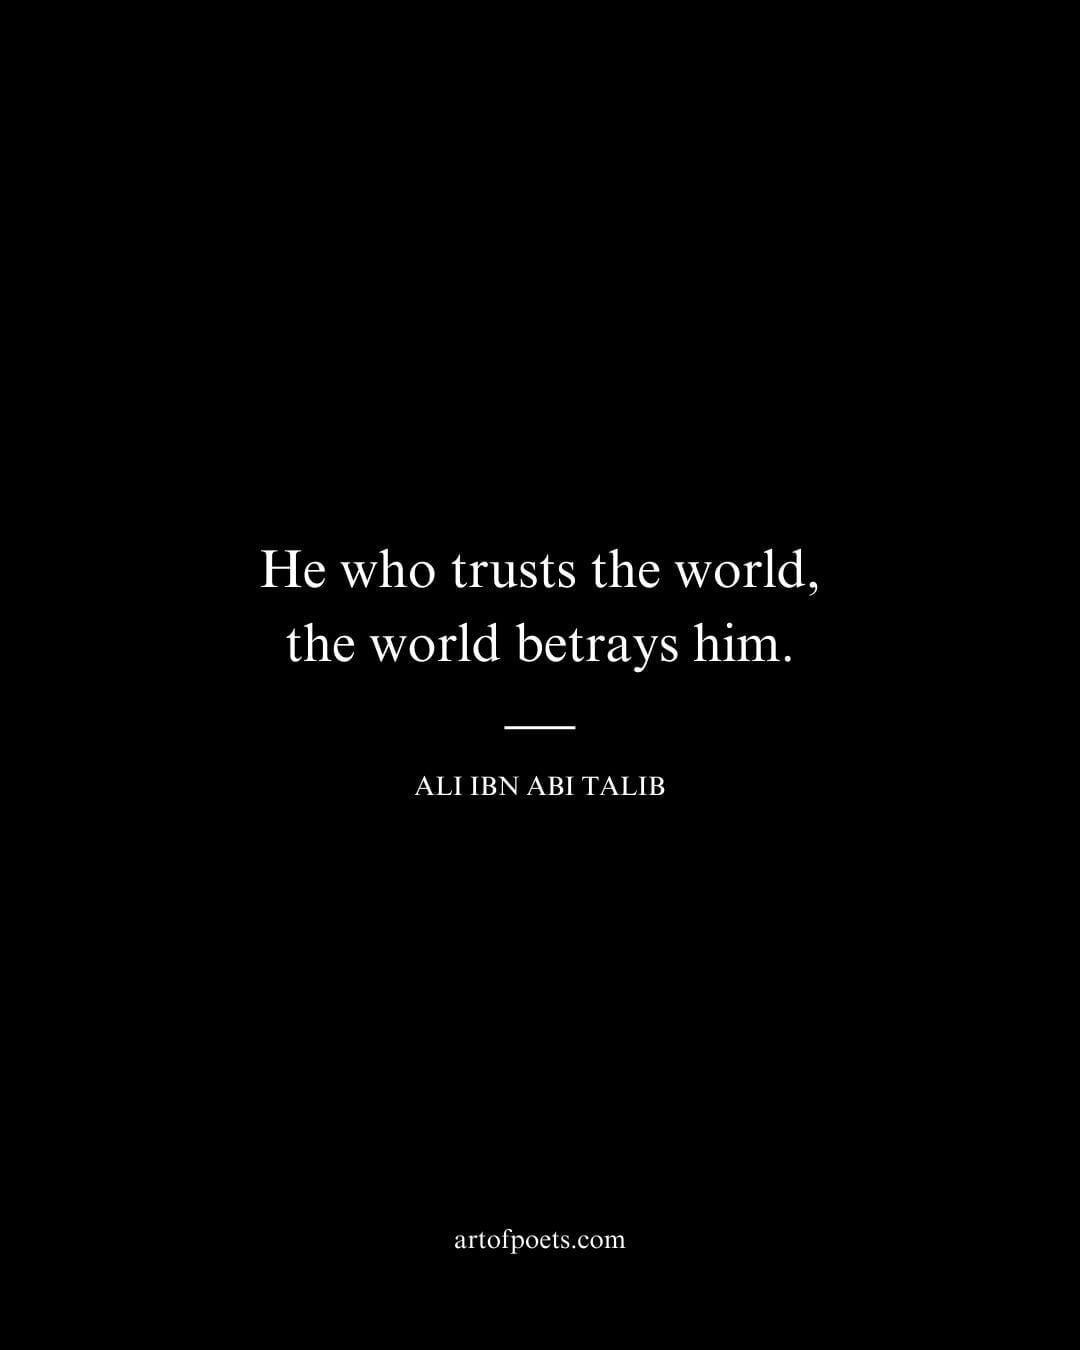 He who trusts the world the world betrays him